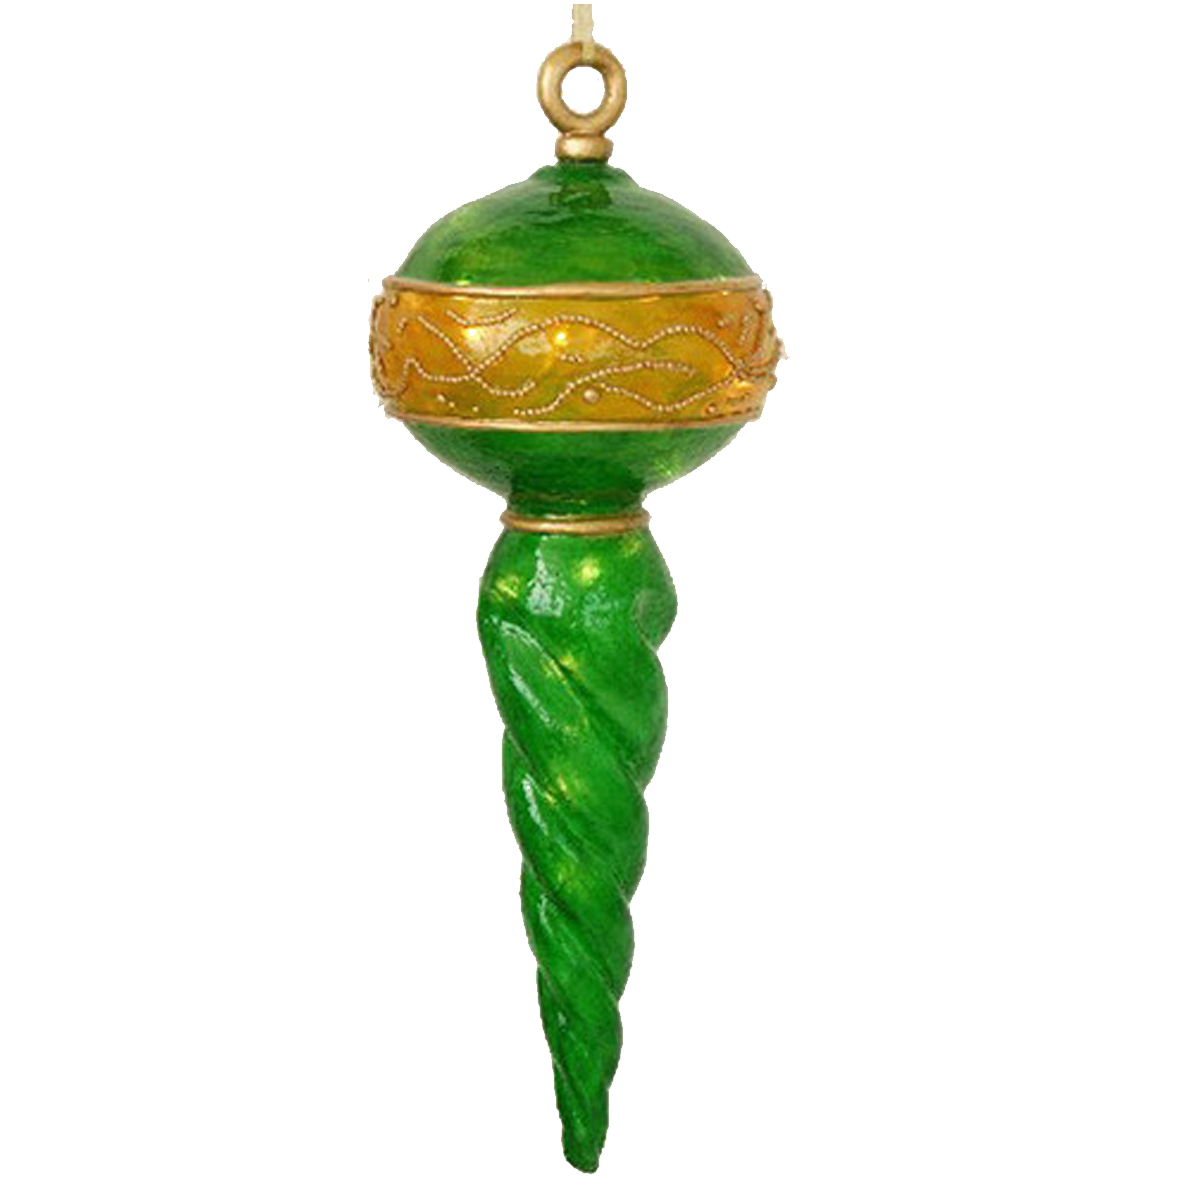 Illuminated Green with Gold Finial Ornament